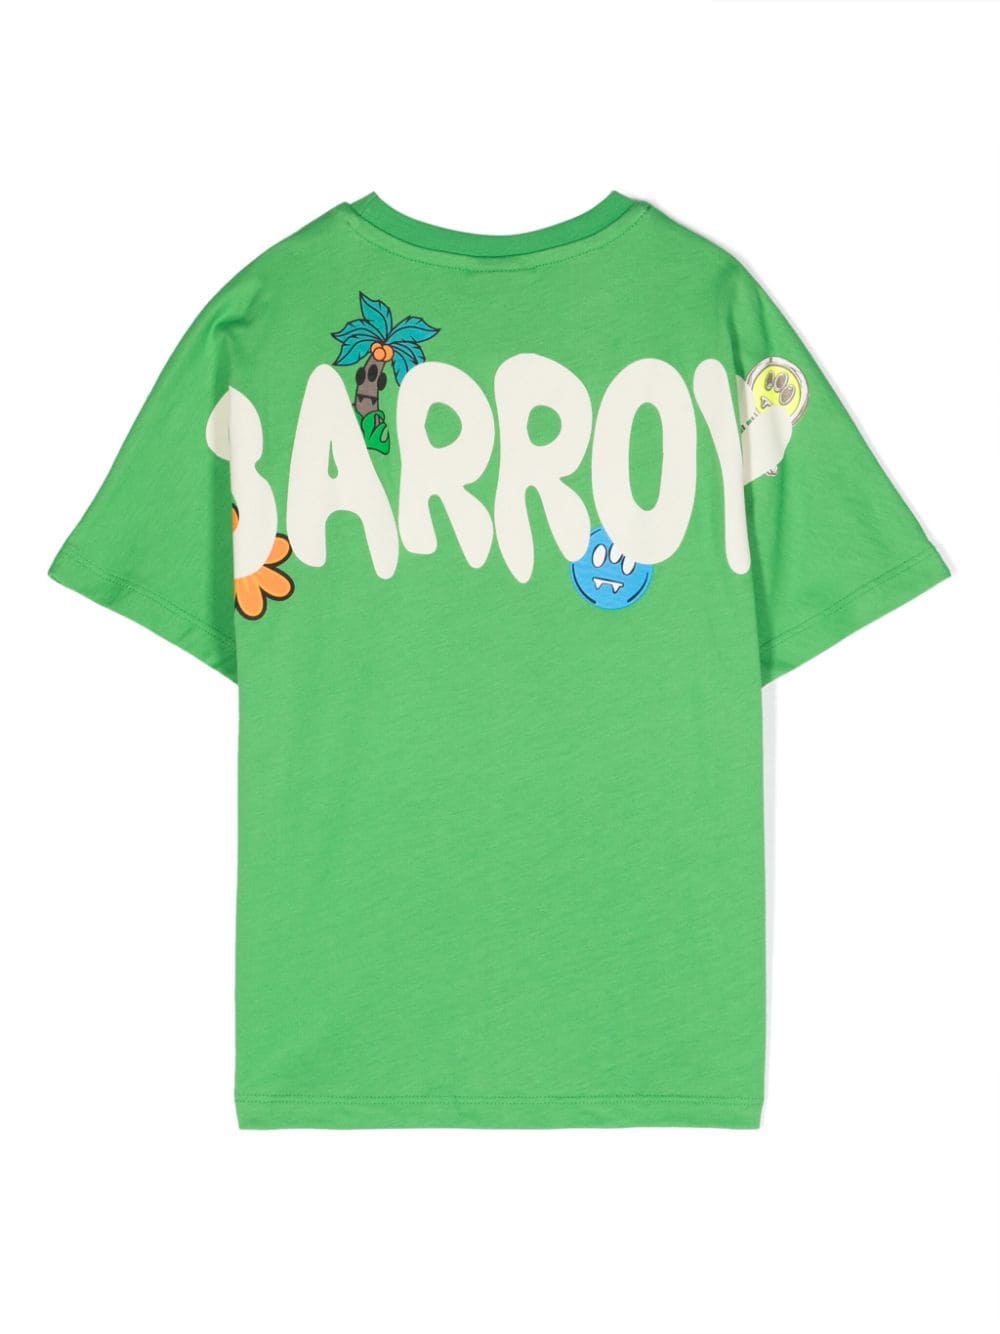 Green t-shirt for boys with logo